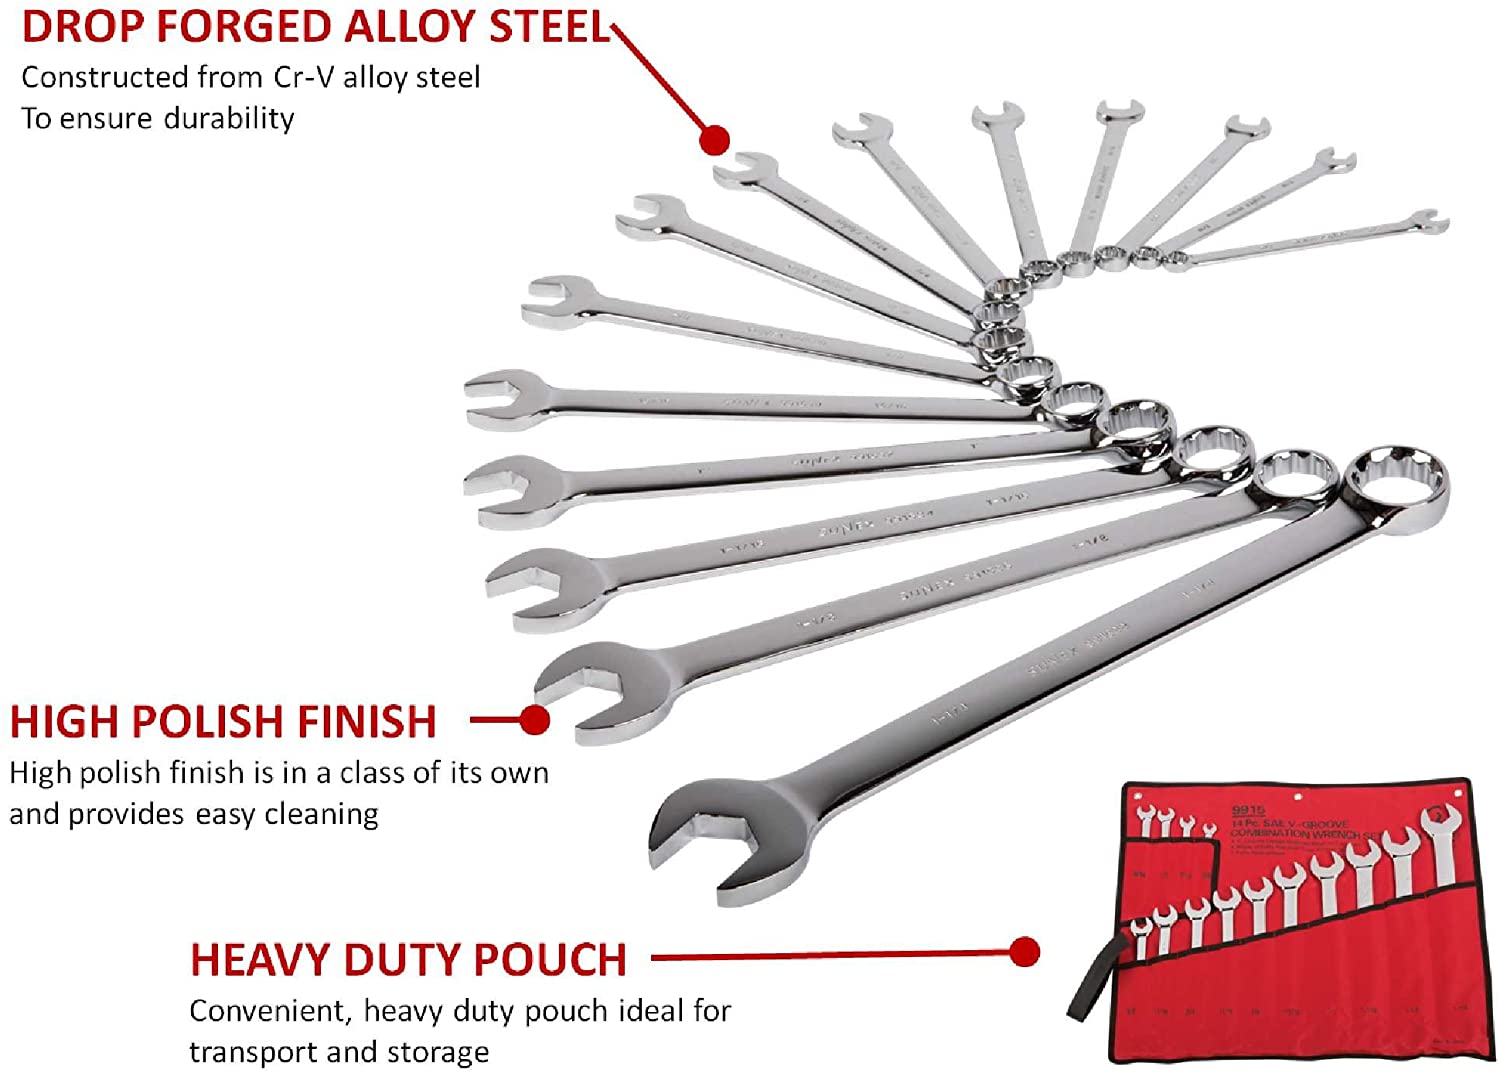 Sunex 9915A V-Groove Fractional Full Polish Combination Wrench Set, 3/8-Inch - 1-1/4-Inch, Fully Polished, 14-Piece (Includes Roll-Case) - MPR Tools & Equipment